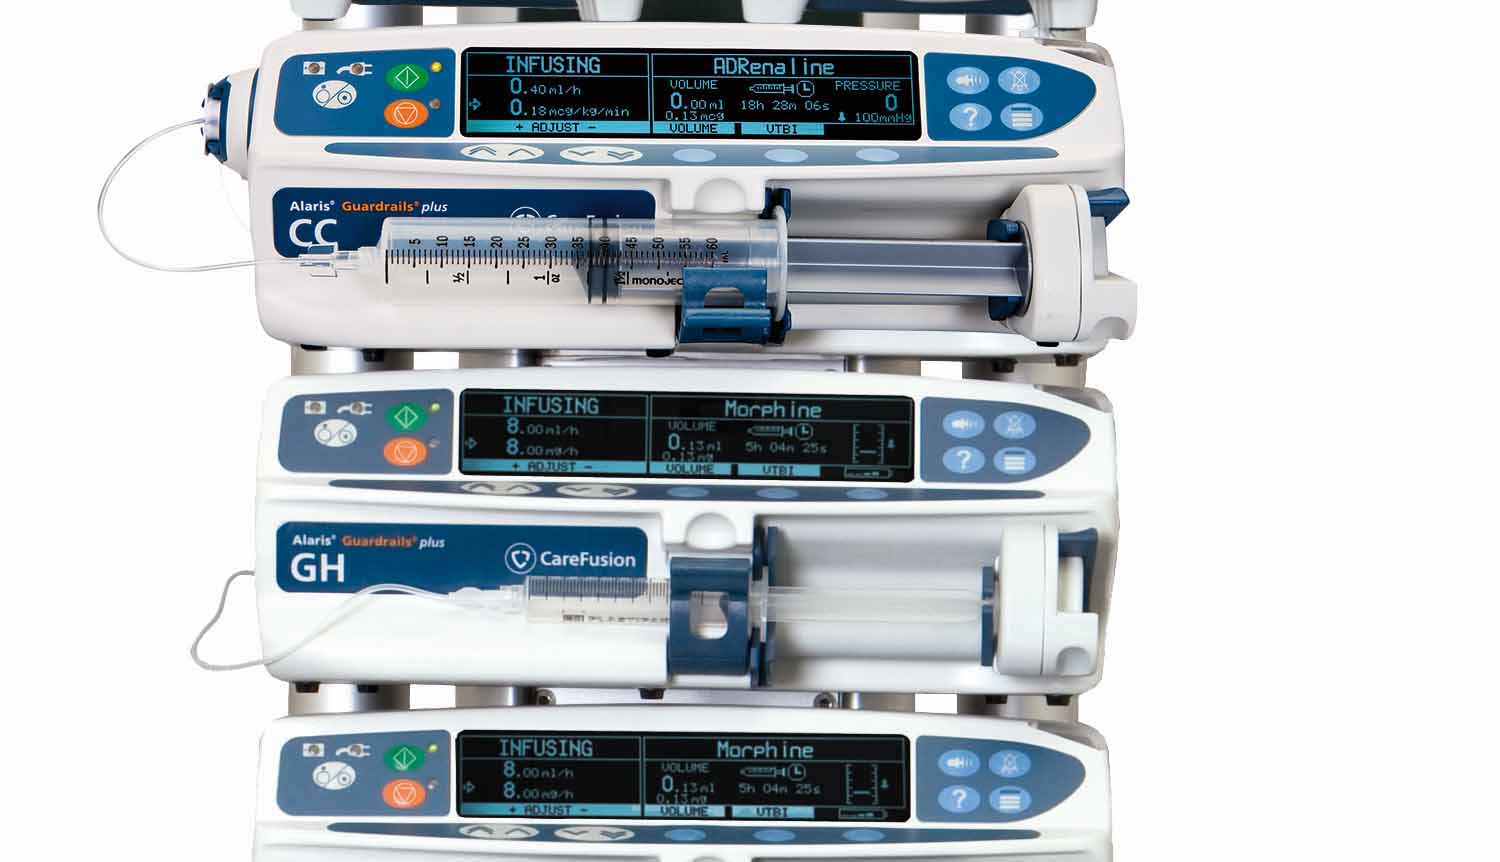 Medical infusion-pump system has two serious bugs, researchers say